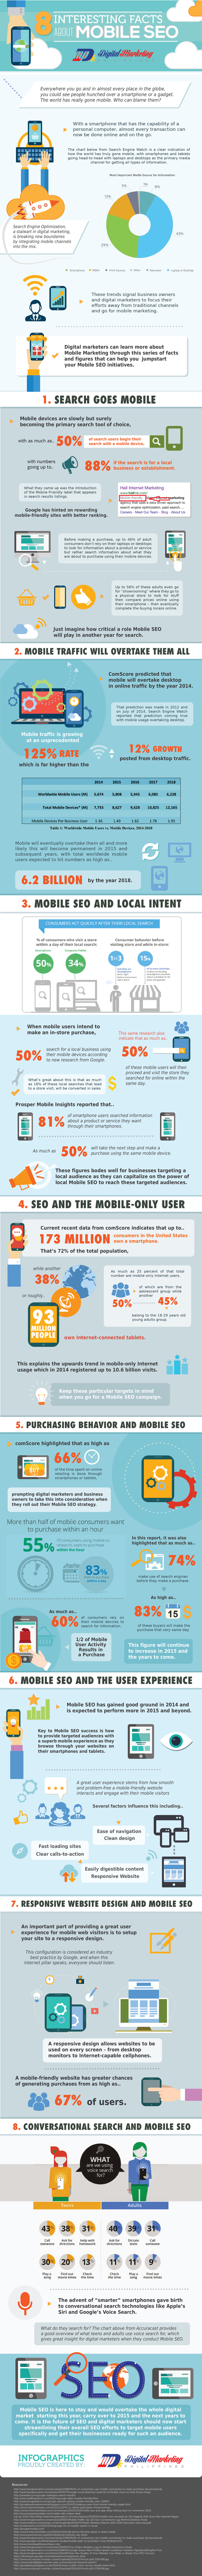 8-Interesting-Facts-about-Mobile-SEO